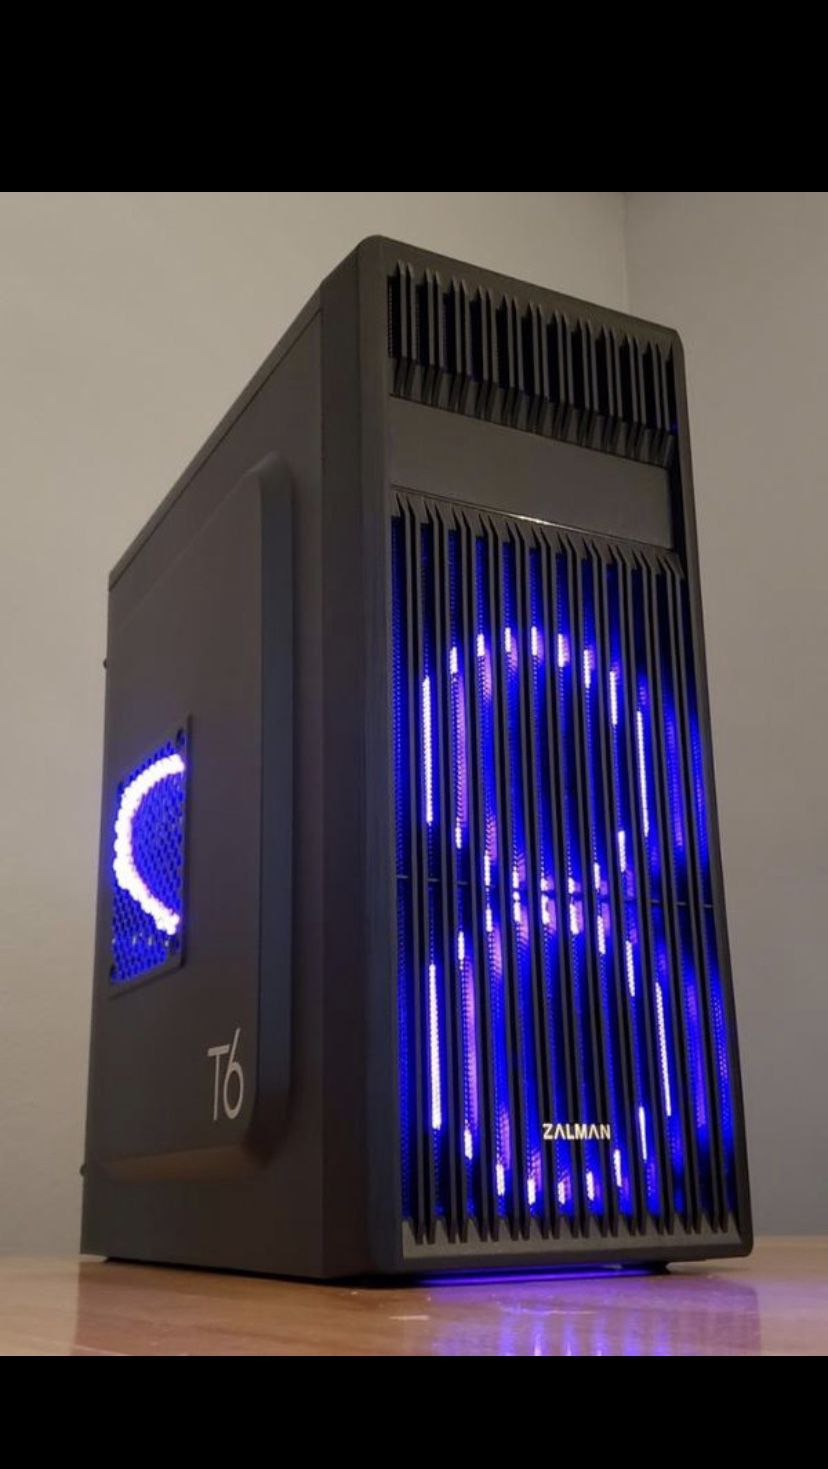 Selling a custom built pc, perfect pc for anyone that wants to start gaming on pc or wants to do business in style with lots of room for upgrades, al